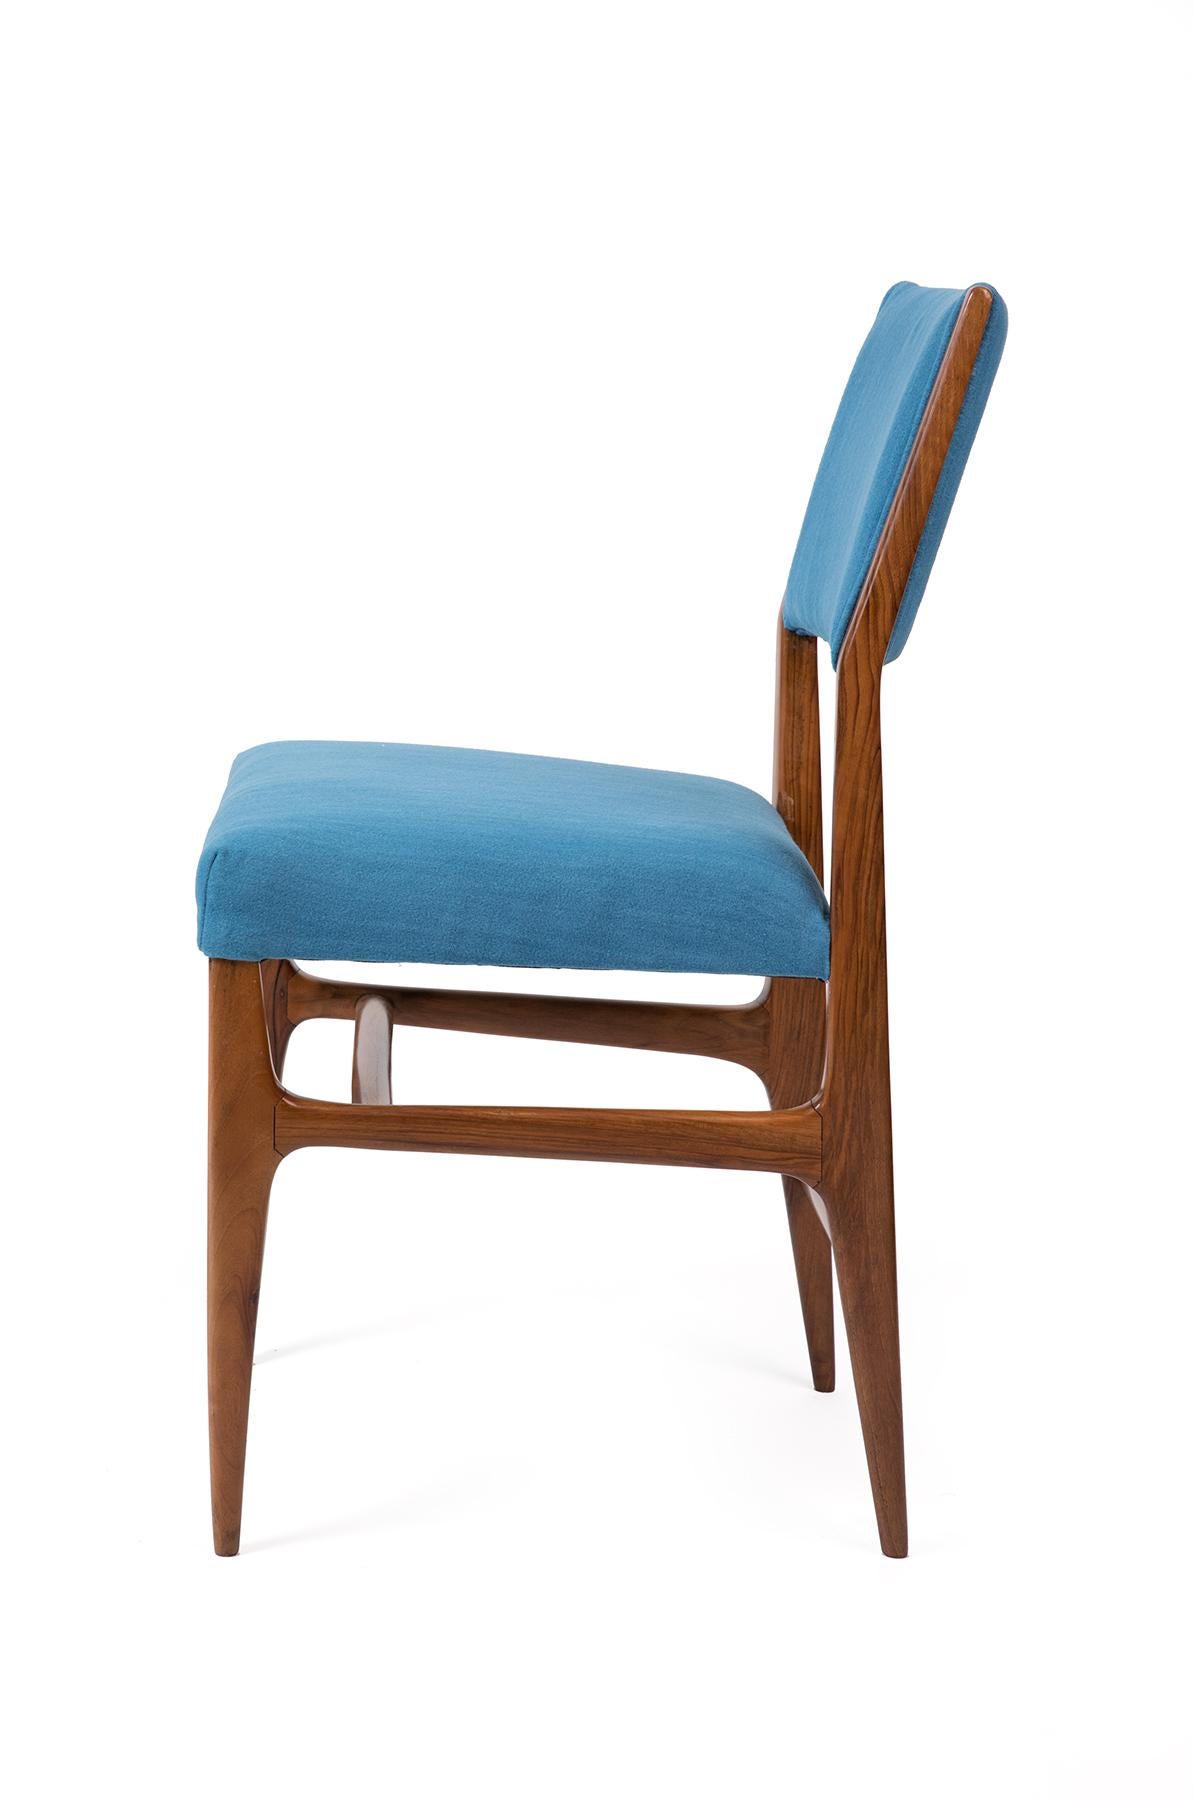 Italian Gio Ponti Walnut Dining Chairs for Singer & Sons with Blue Upholstery, Set of 4 